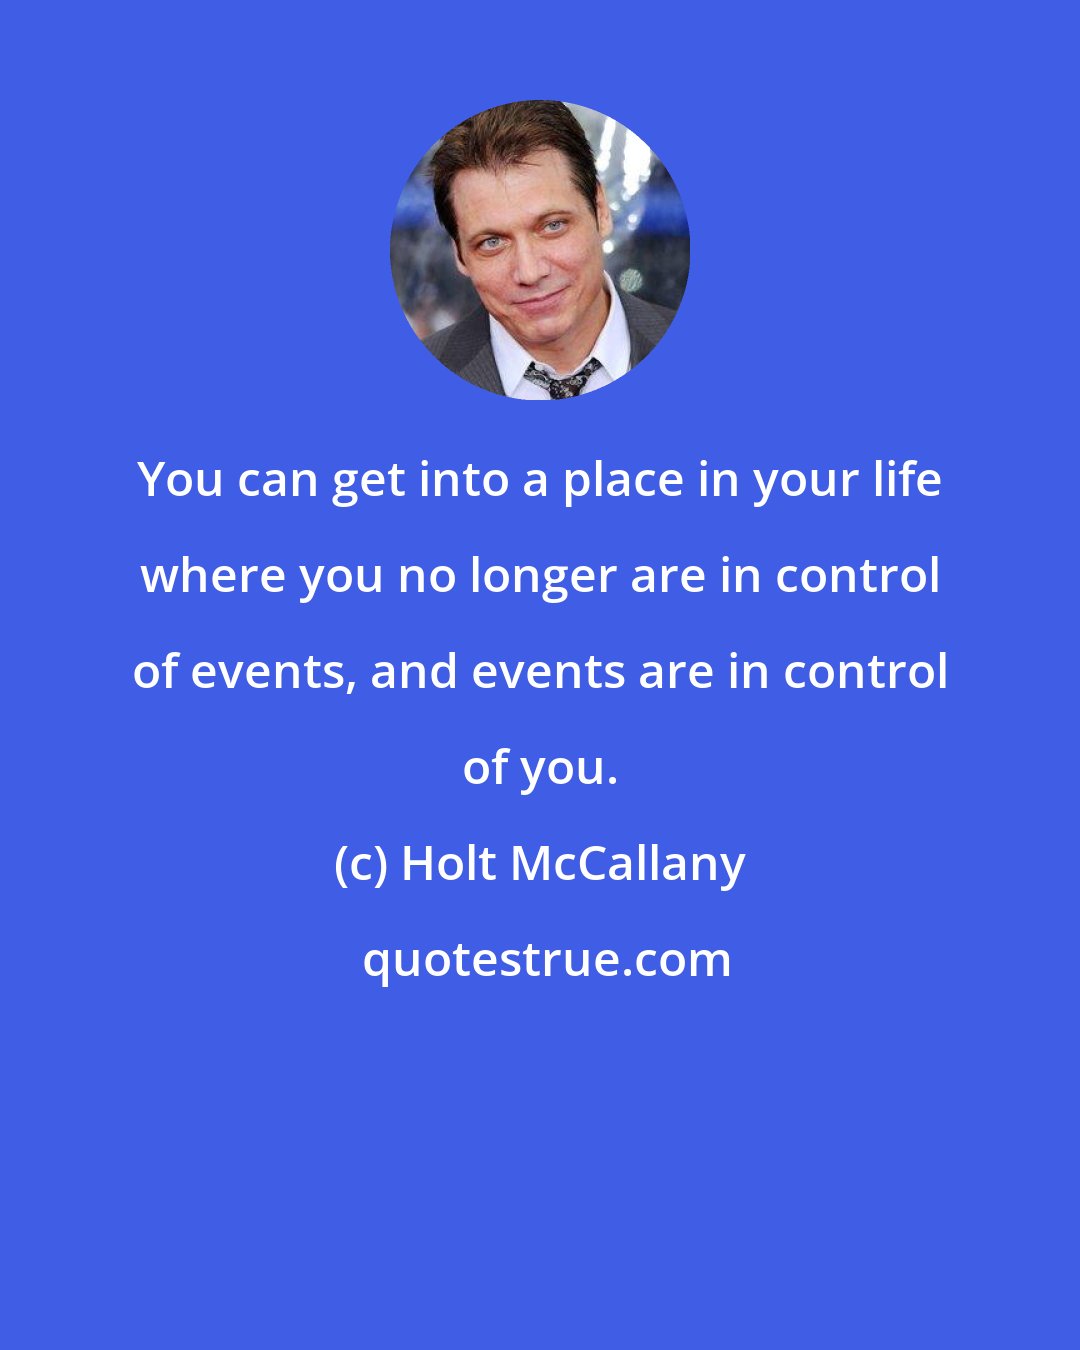 Holt McCallany: You can get into a place in your life where you no longer are in control of events, and events are in control of you.